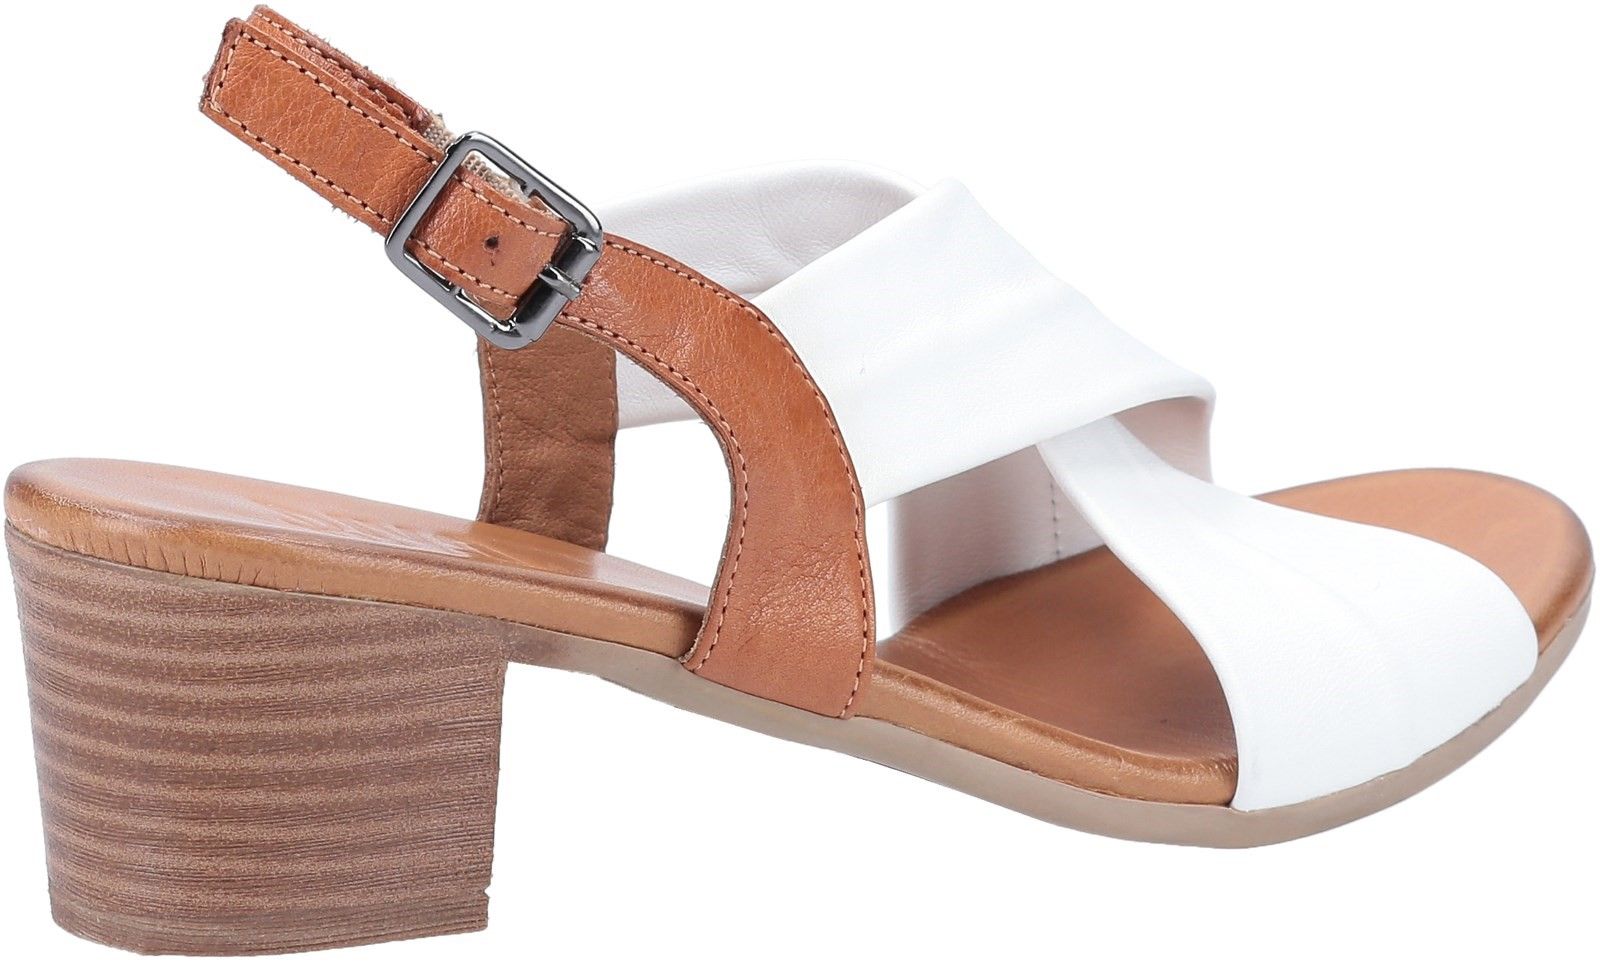 Womens Slingback Sandal from Riva, Tule takes you from day to night in chic casual style. Crafted from soft Leather and featuring a crossover design with adjustable buckle fastening for a secure fit. Slingback Sandal. 
Leather Upper. 
Buckle Adjustable Fastening. 
Block heel. 
Crossover design.